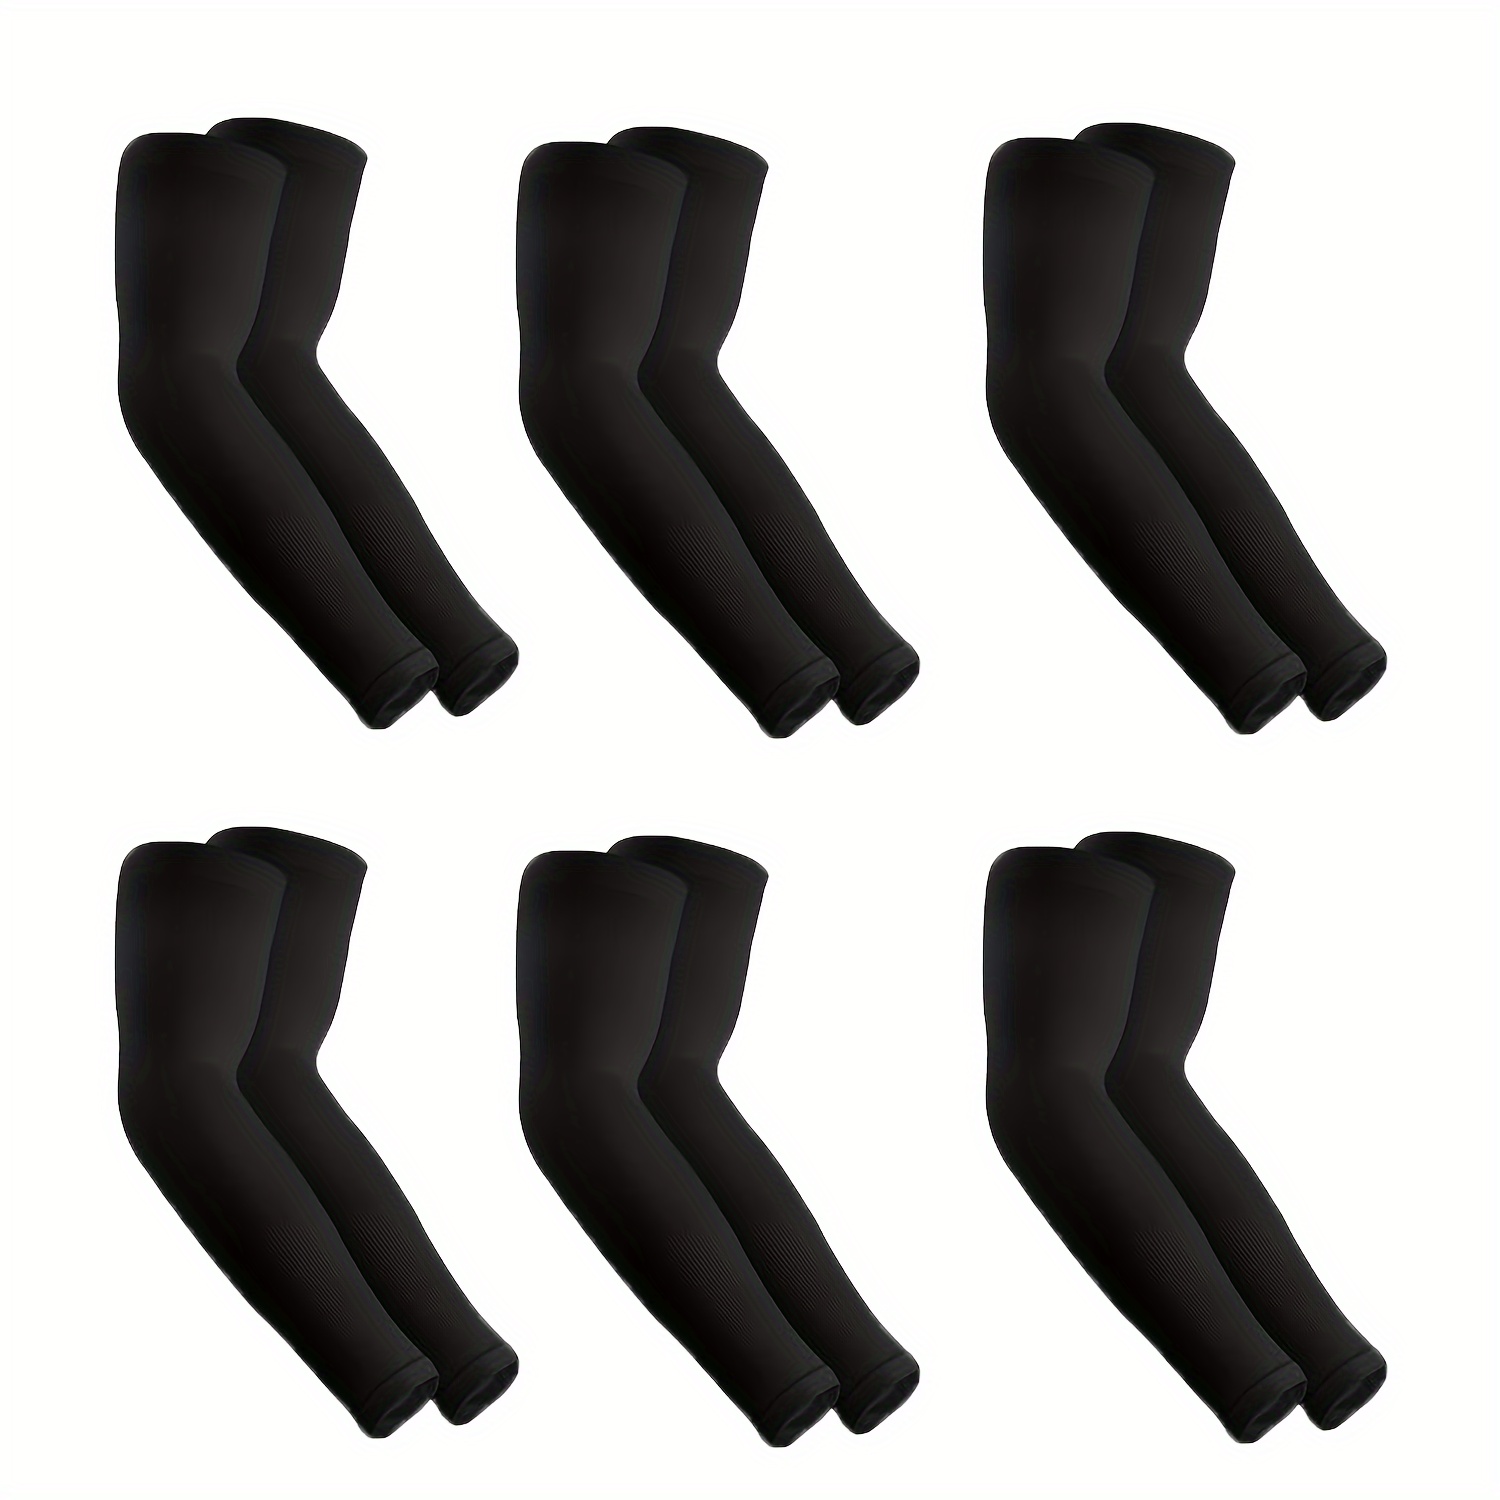 

6 Pairs Uv Protection Arm Sleeves For Outdoor Activities - Breathable And Moisture-wicking